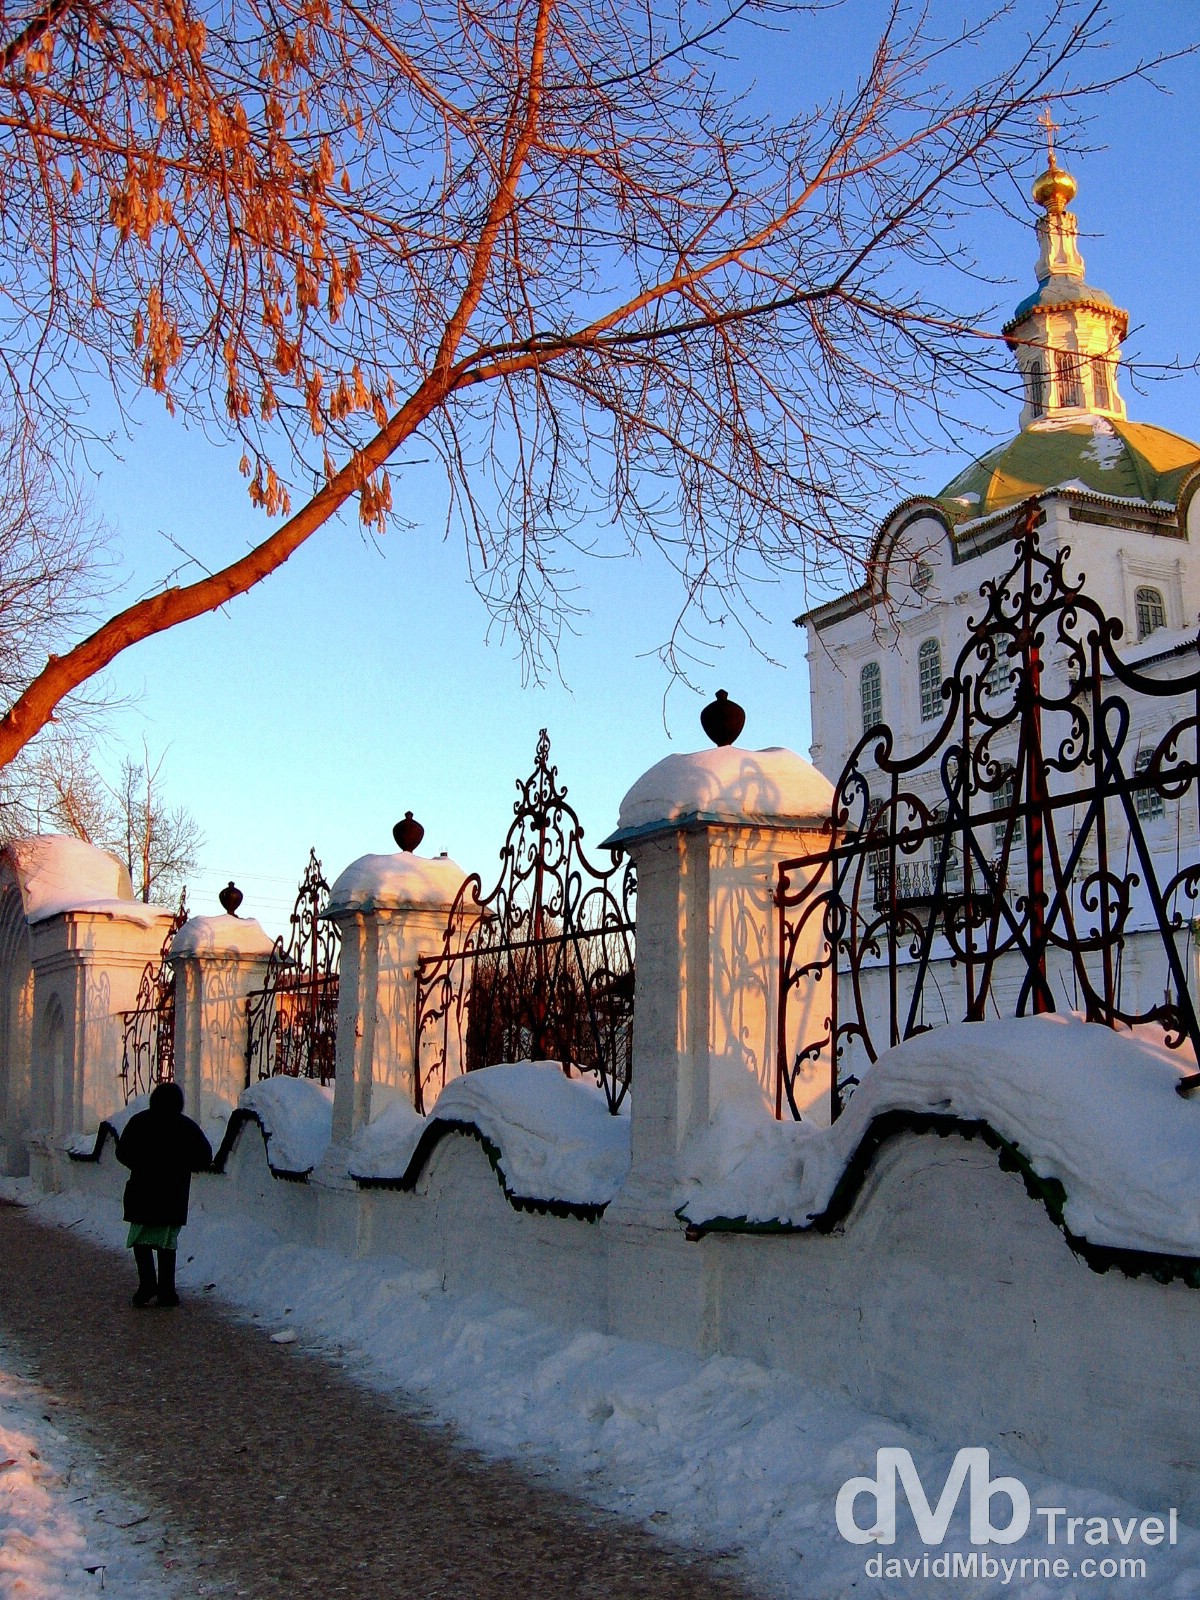 Walking on the icy paths at sunset outside the Mikhail Arkhangel Church, Old Town Tobolsk, Siberian Russia. February 22, 2006.